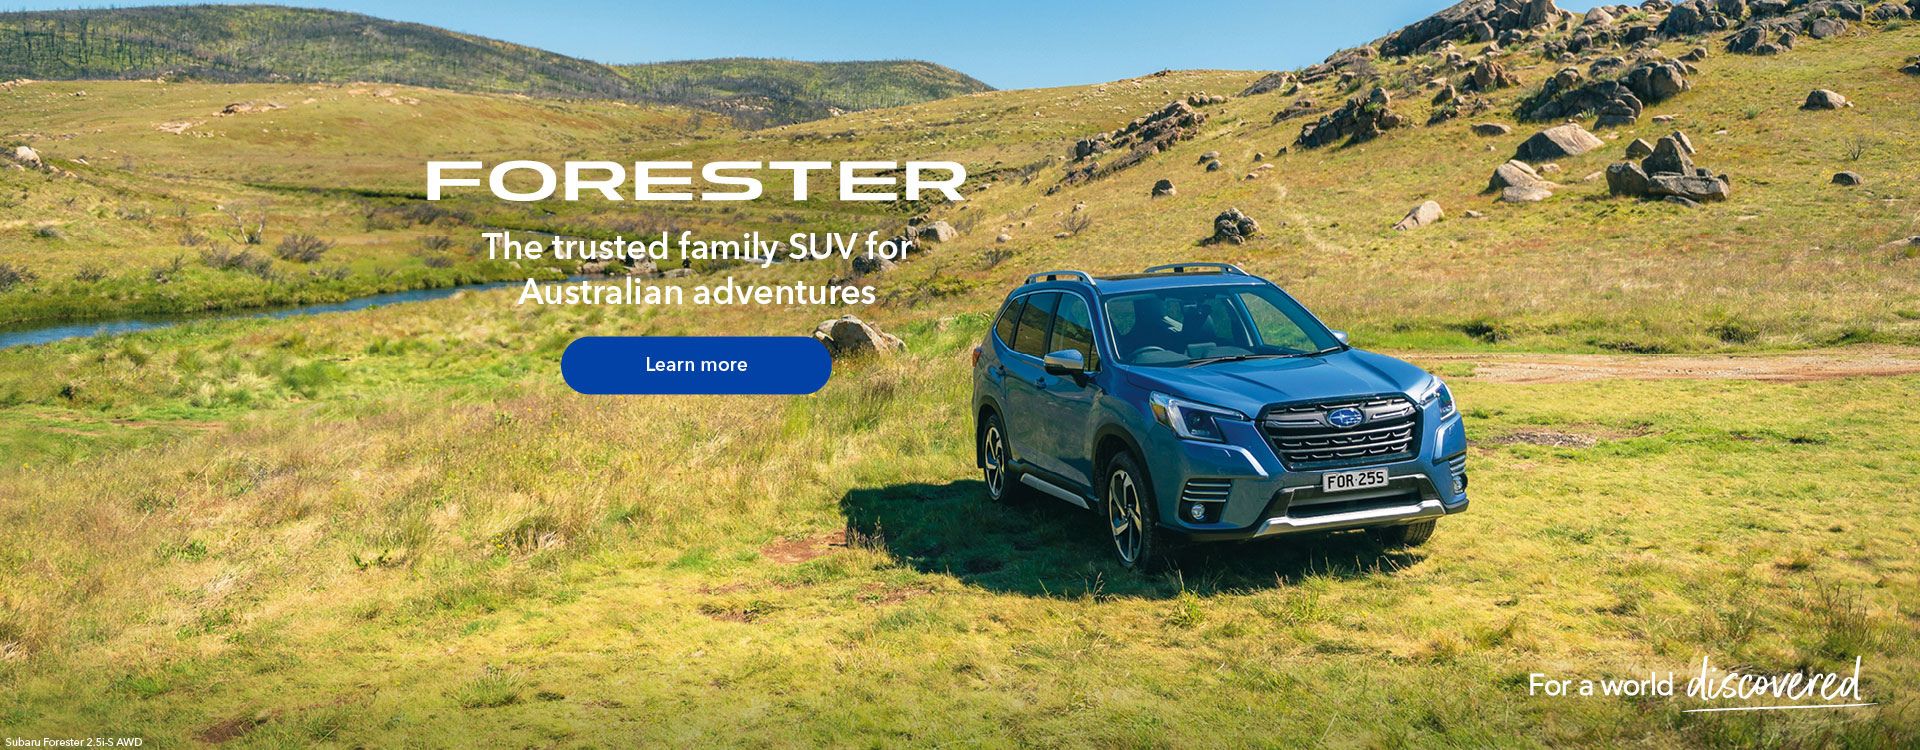 Forester. The trusted family SUV for Australian adventures